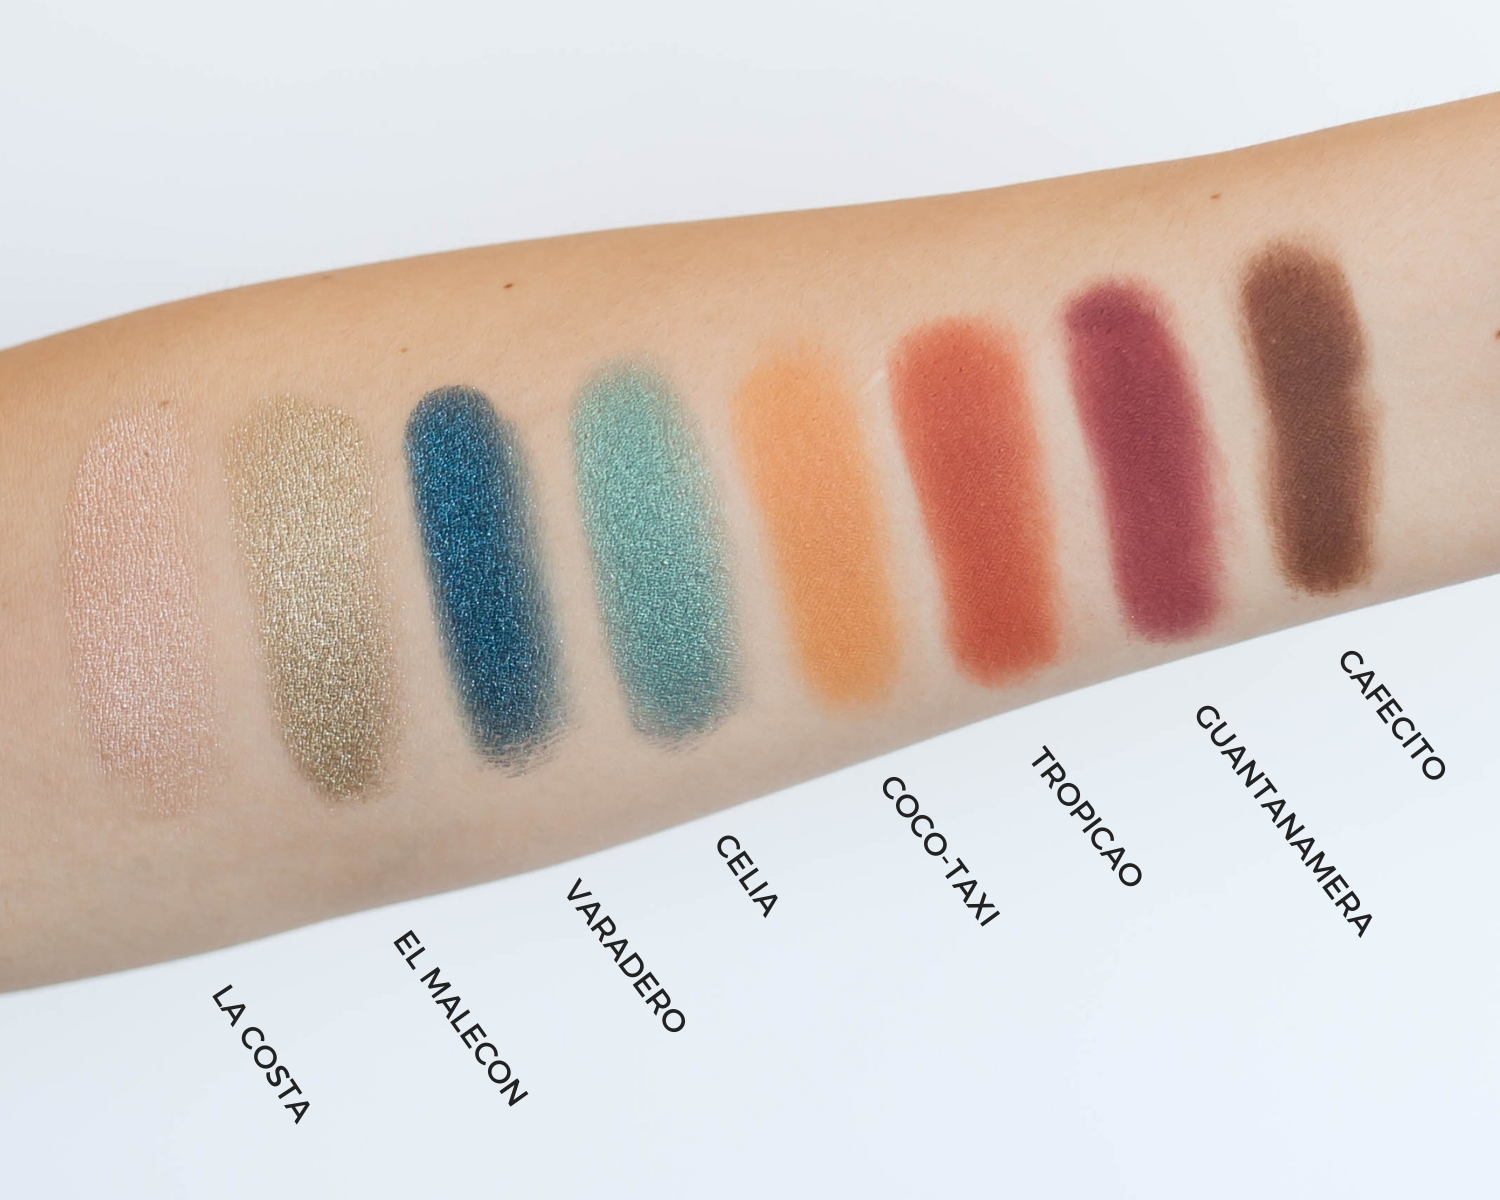 Alamar Cosmetics Reina Del Caribe Vol. 1 Palette Review + Swatches | Twinspiration